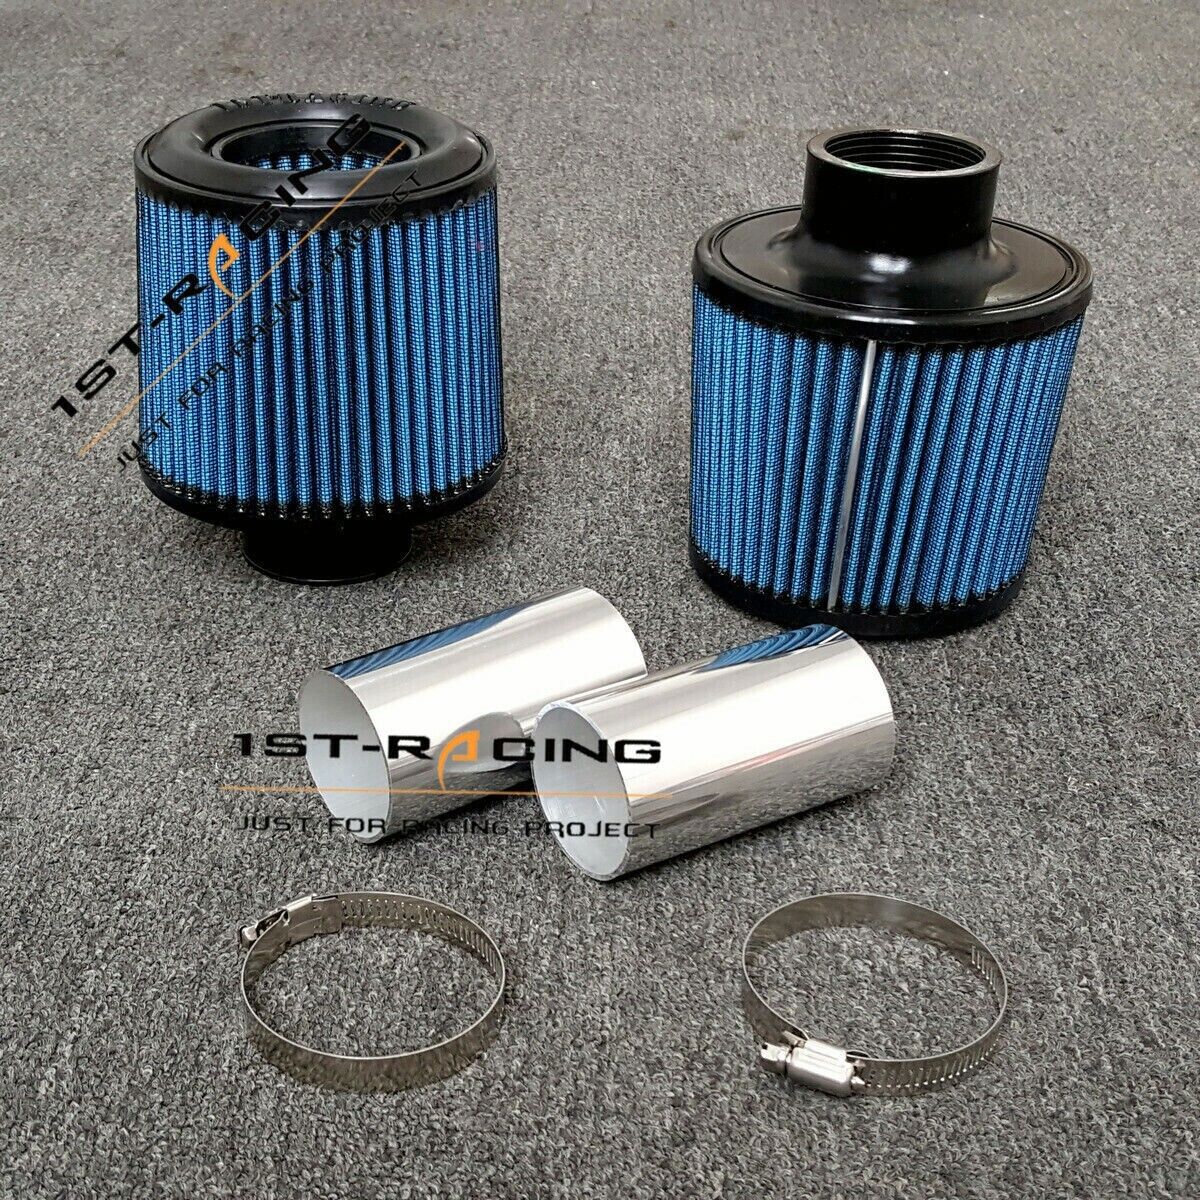 N54 Dual Cone Filter Air Intake Kit for BMW 135i 335i 335xi Z4 3.0L Twin Turbos